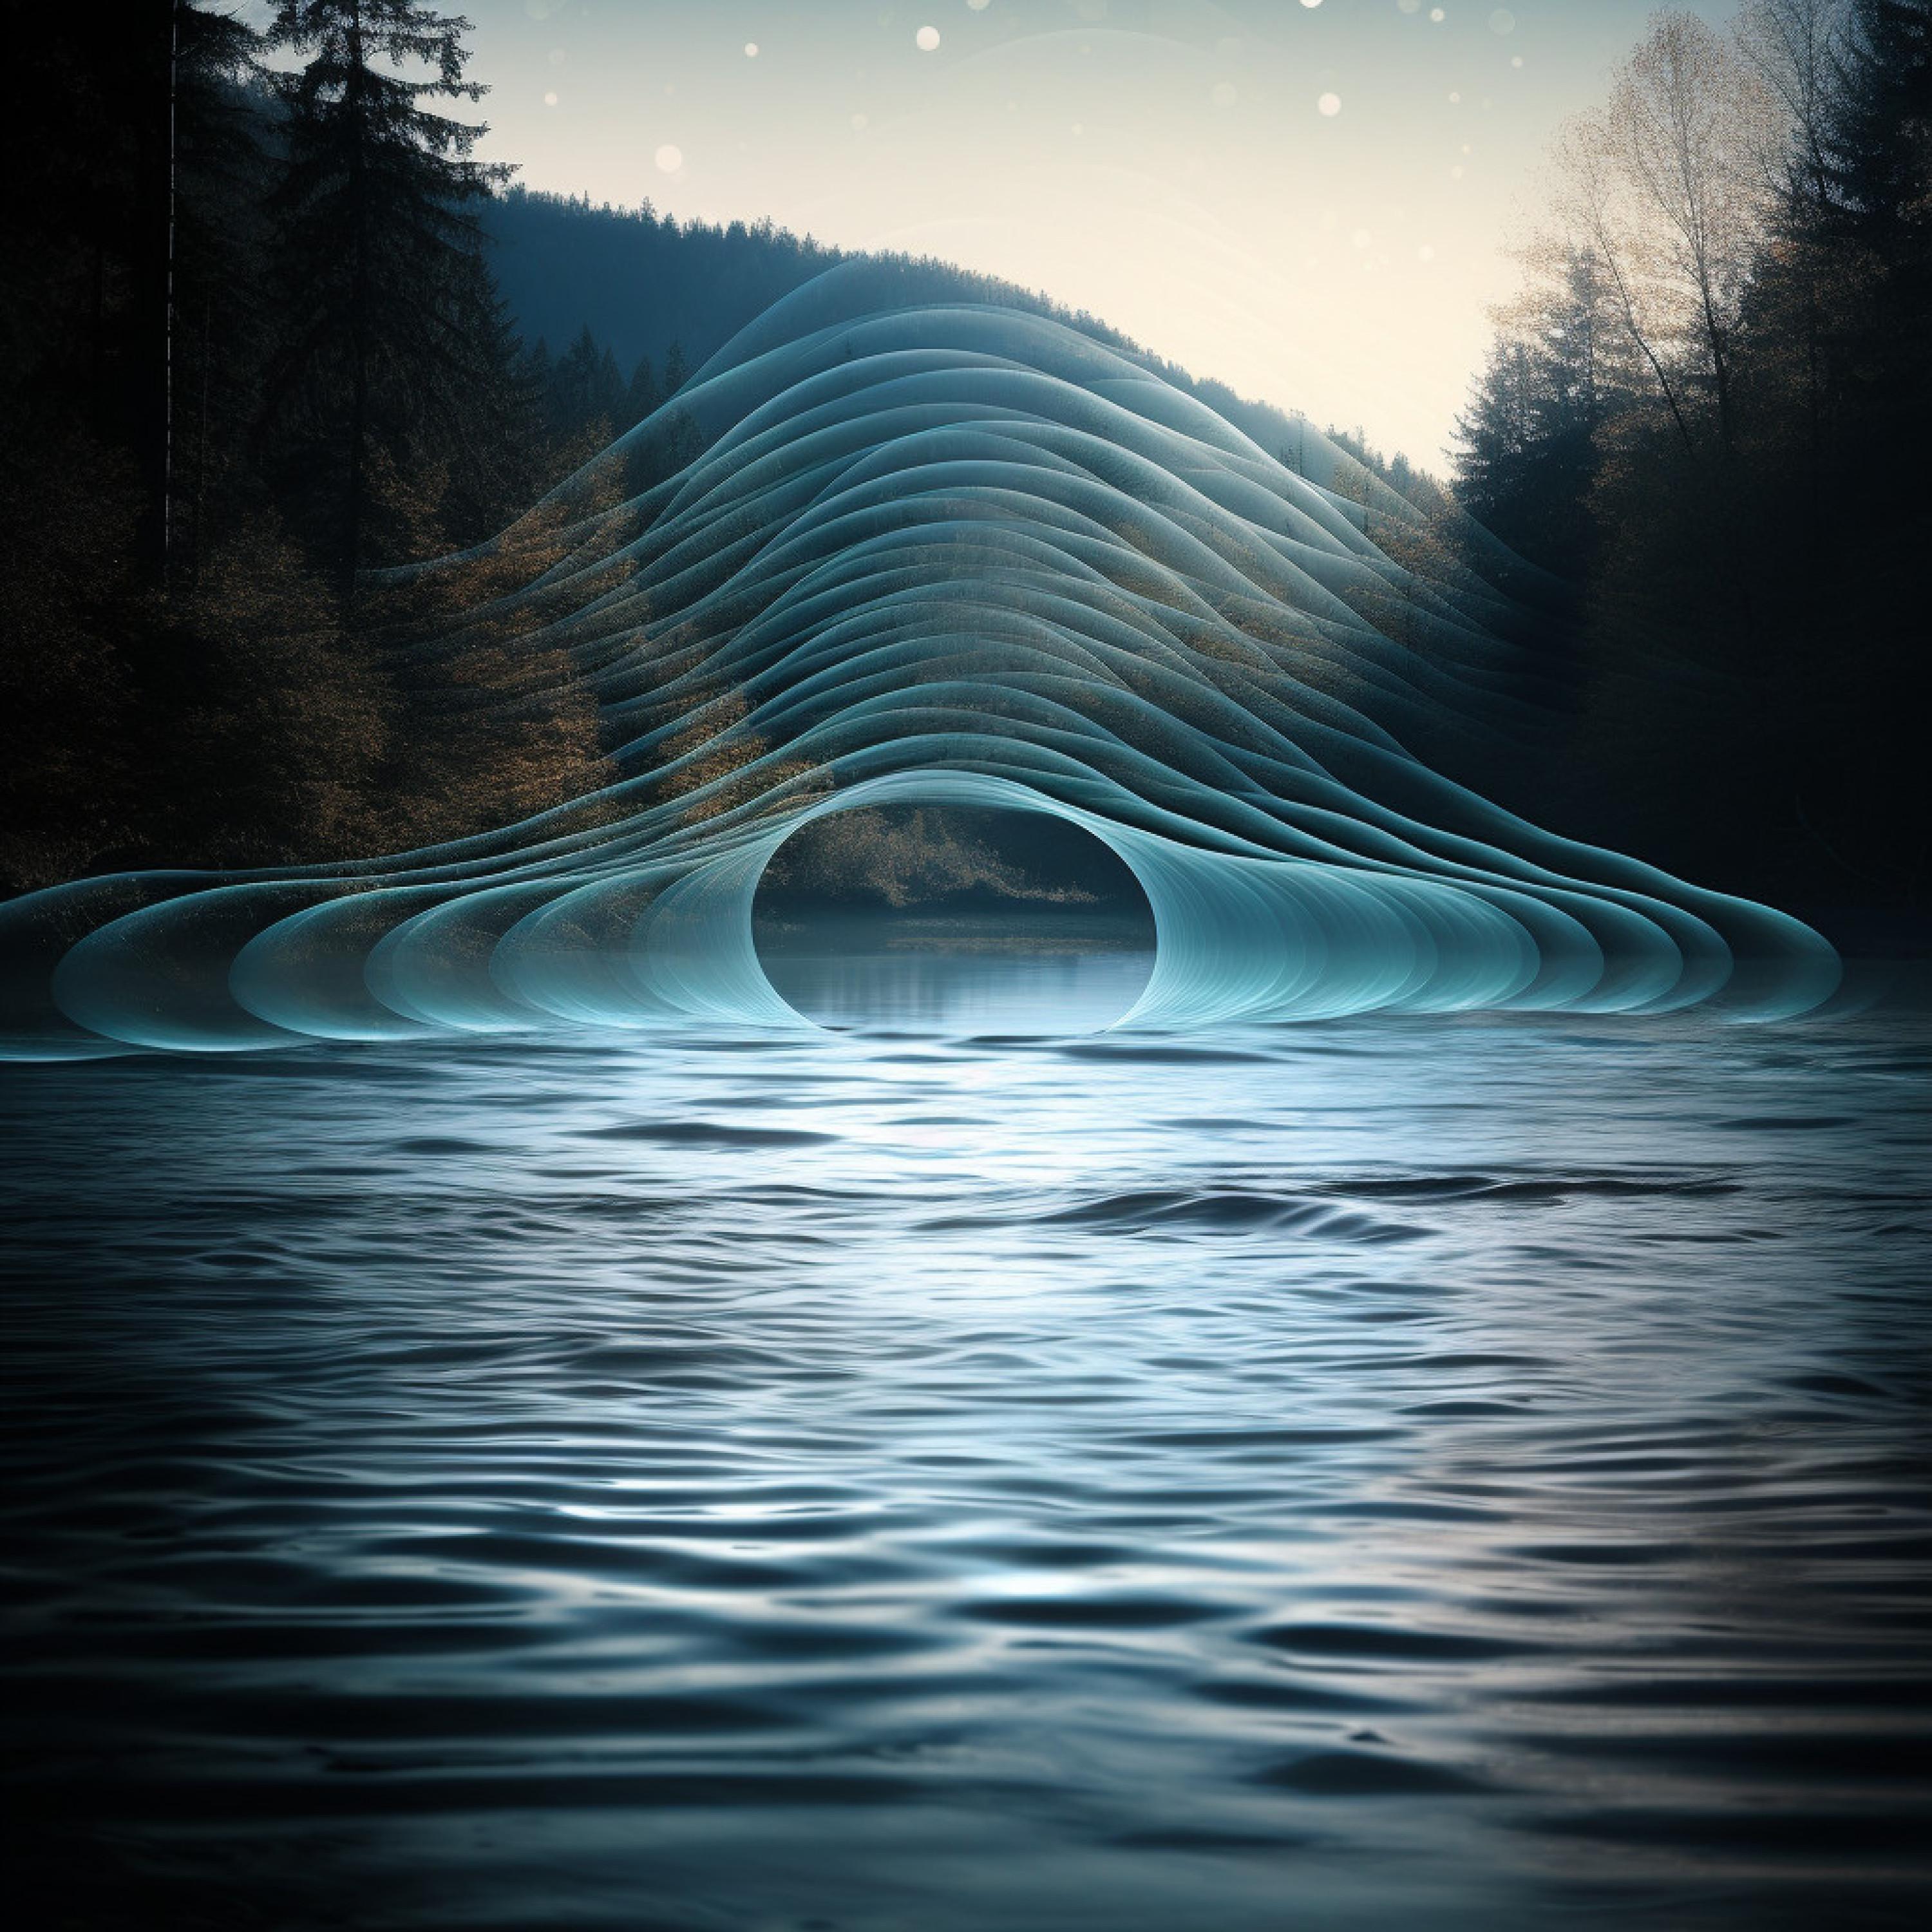 Natural Healing Music Zone - Clarity Sound River Focus